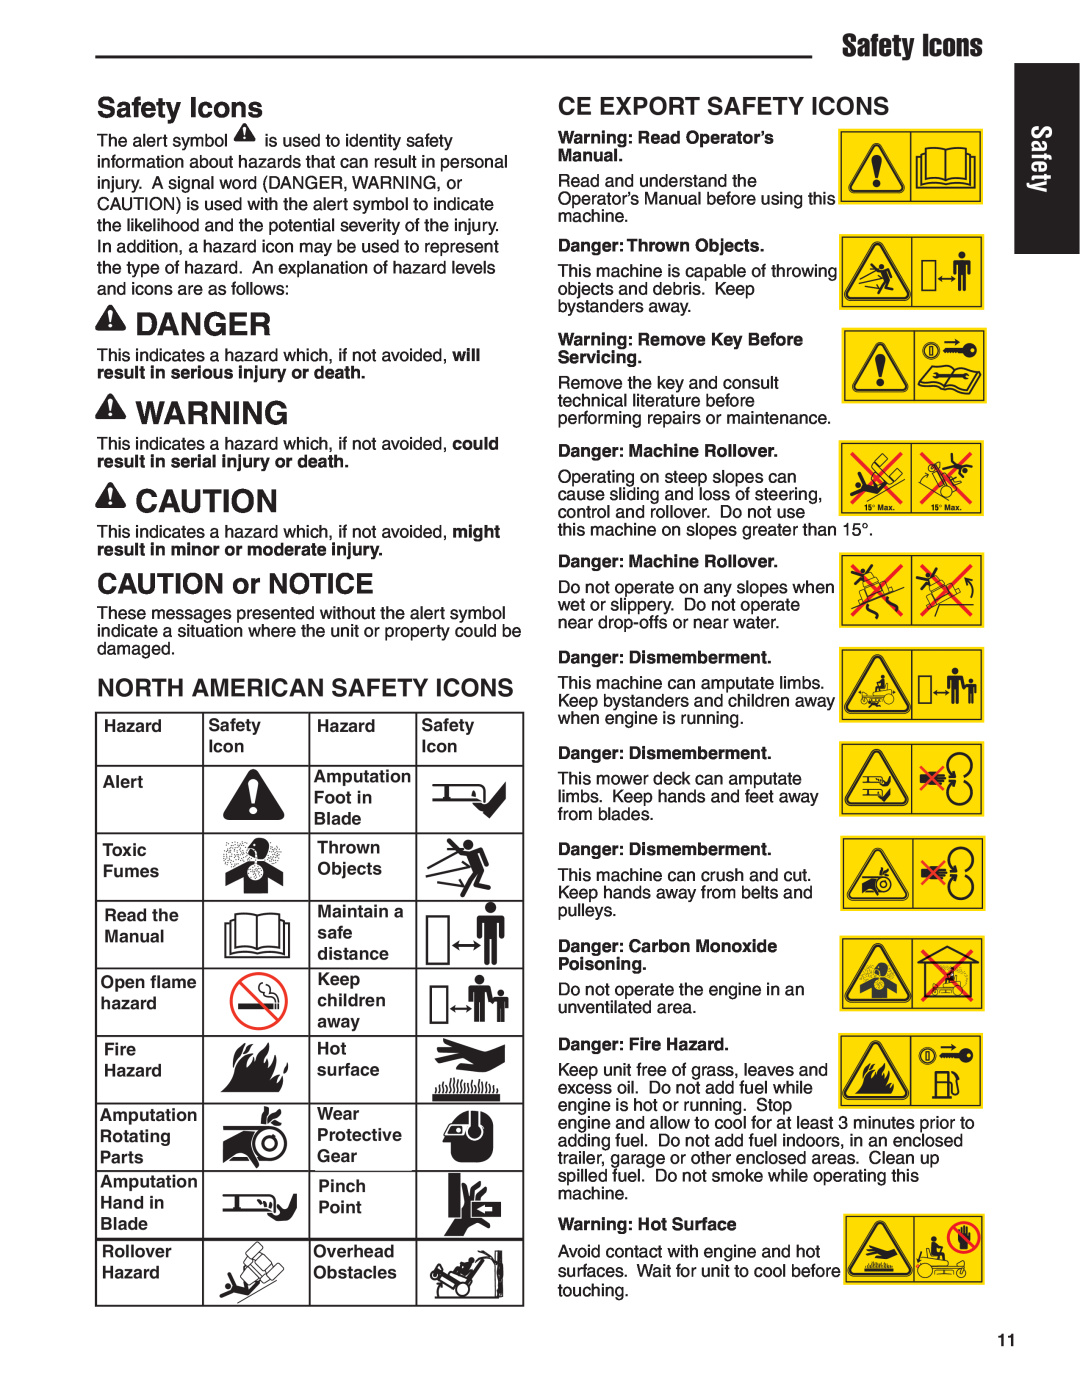 Simplicity 24HP manual Danger, North American Safety Icons, Ce Export Safety Icons, CAUTION or NOTICE 